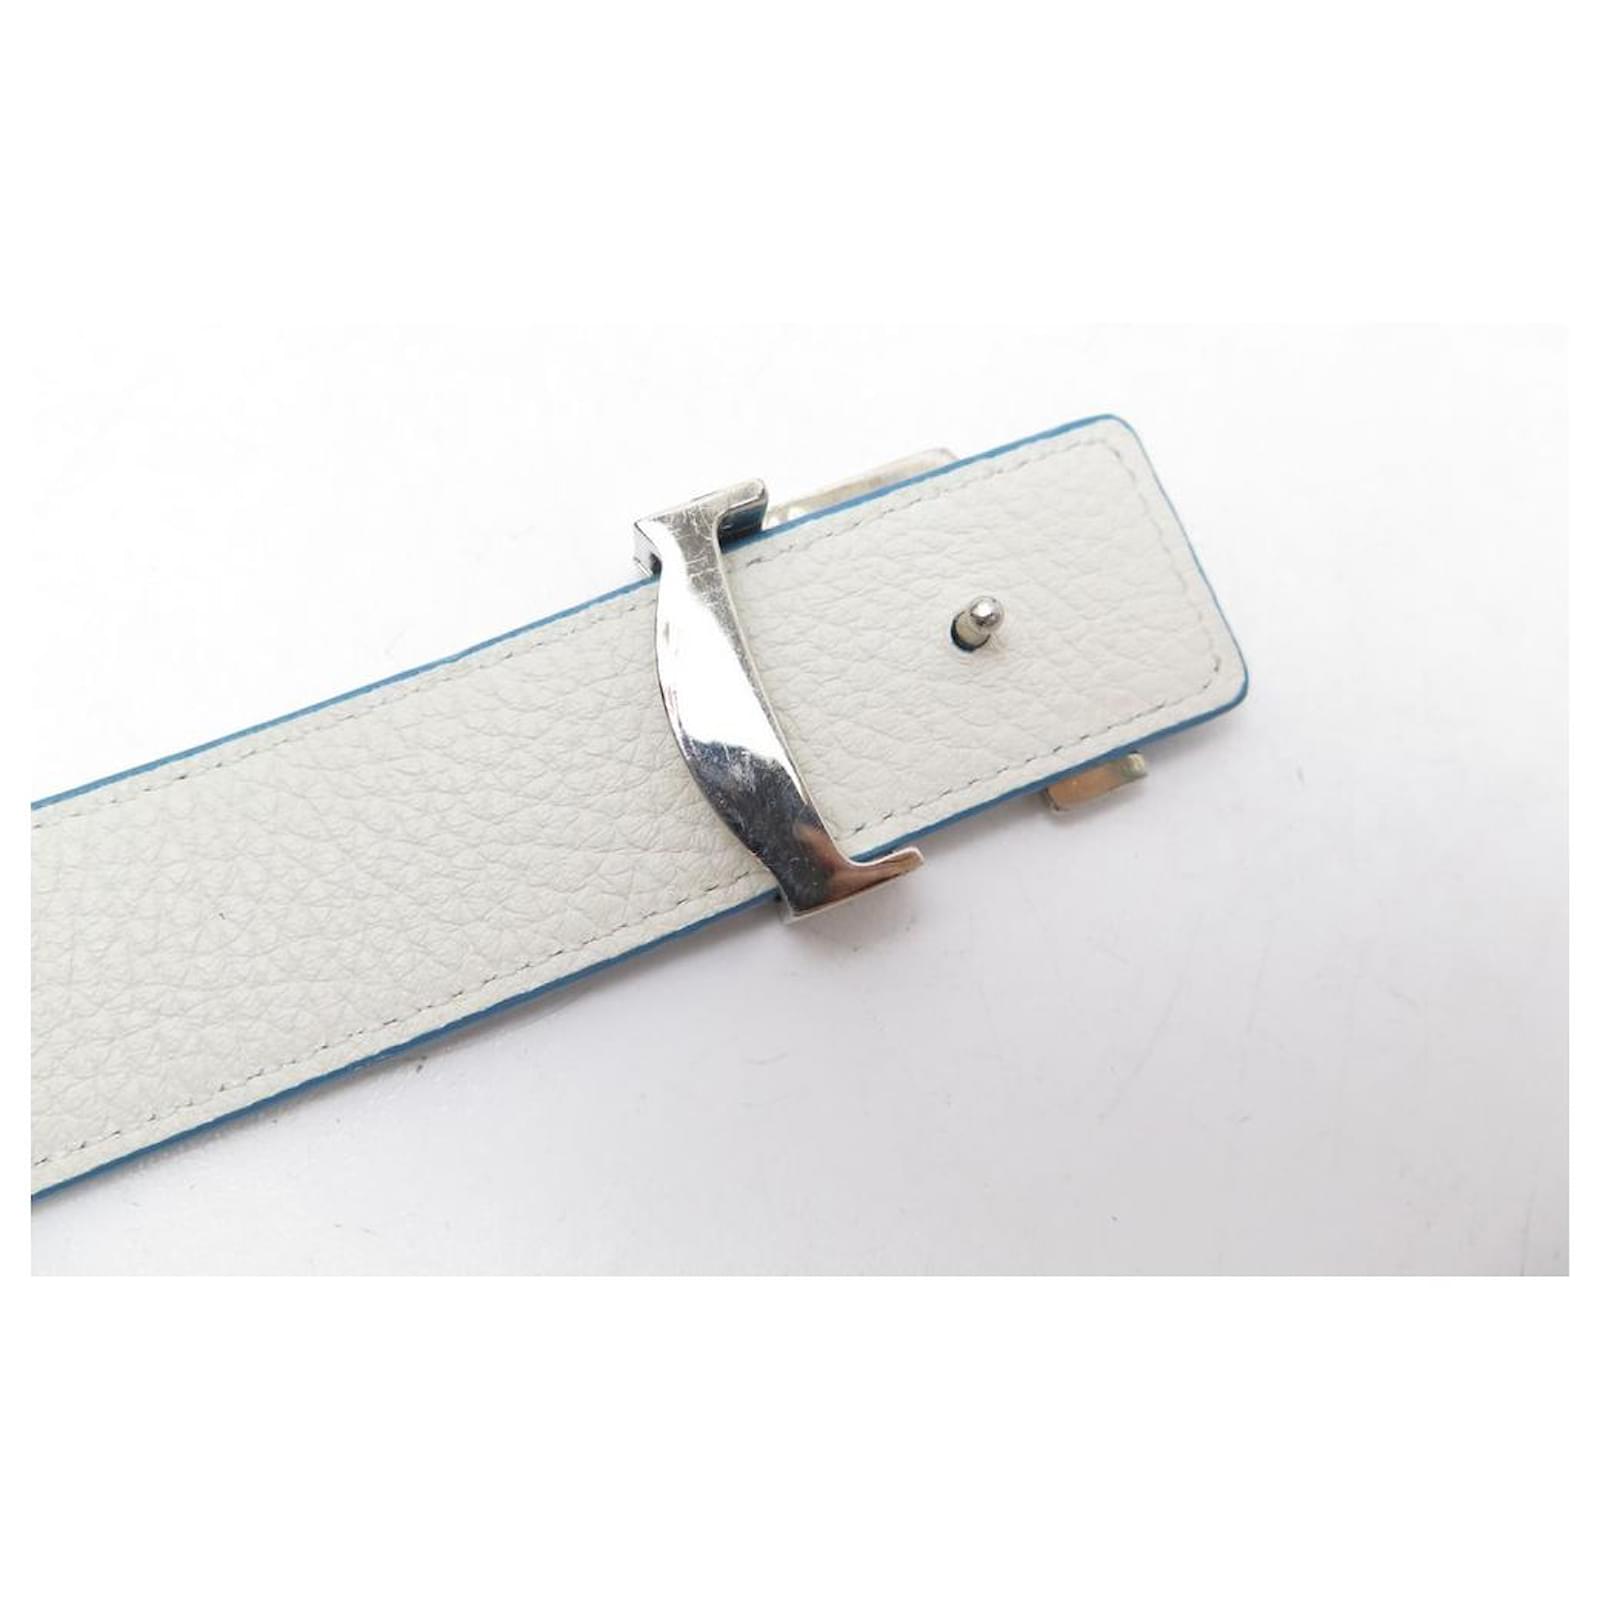 REVERSIBLE BELT LV LOUIS VUITTON M9039 85 CM IN BLUE AND WHITE LEATHER BELT